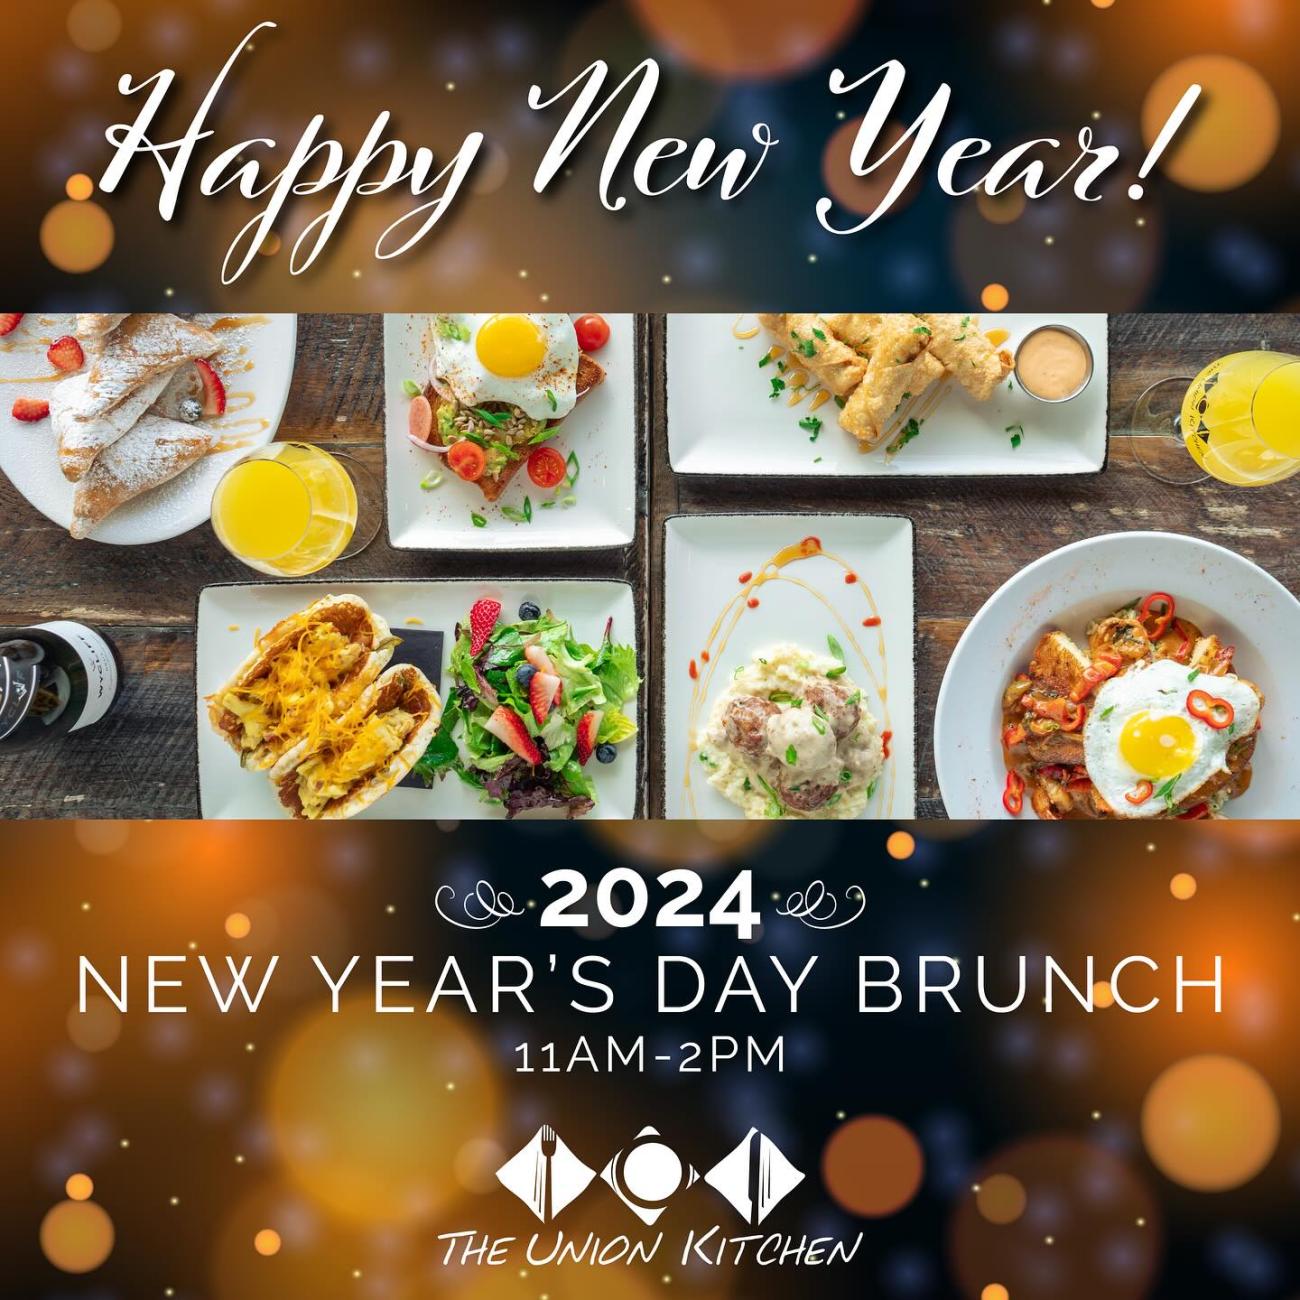 New Year's Day Brunch